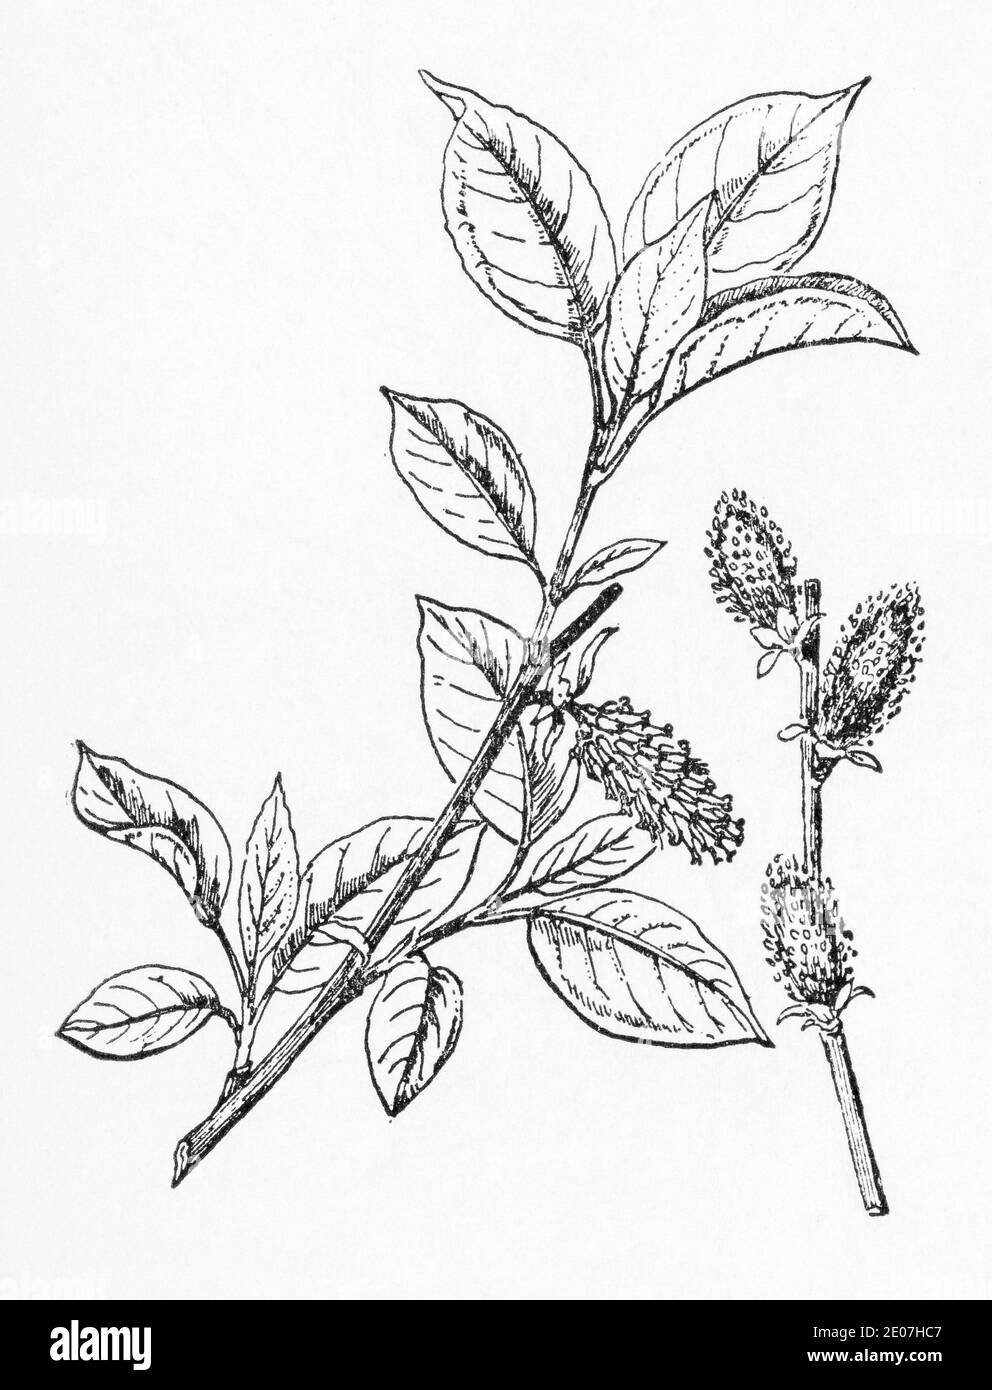 Old botanical illustration engraving of Grey Willow, Sallow / Salix cinerea. Traditional medicinal herbal plant. See Notes Stock Photo